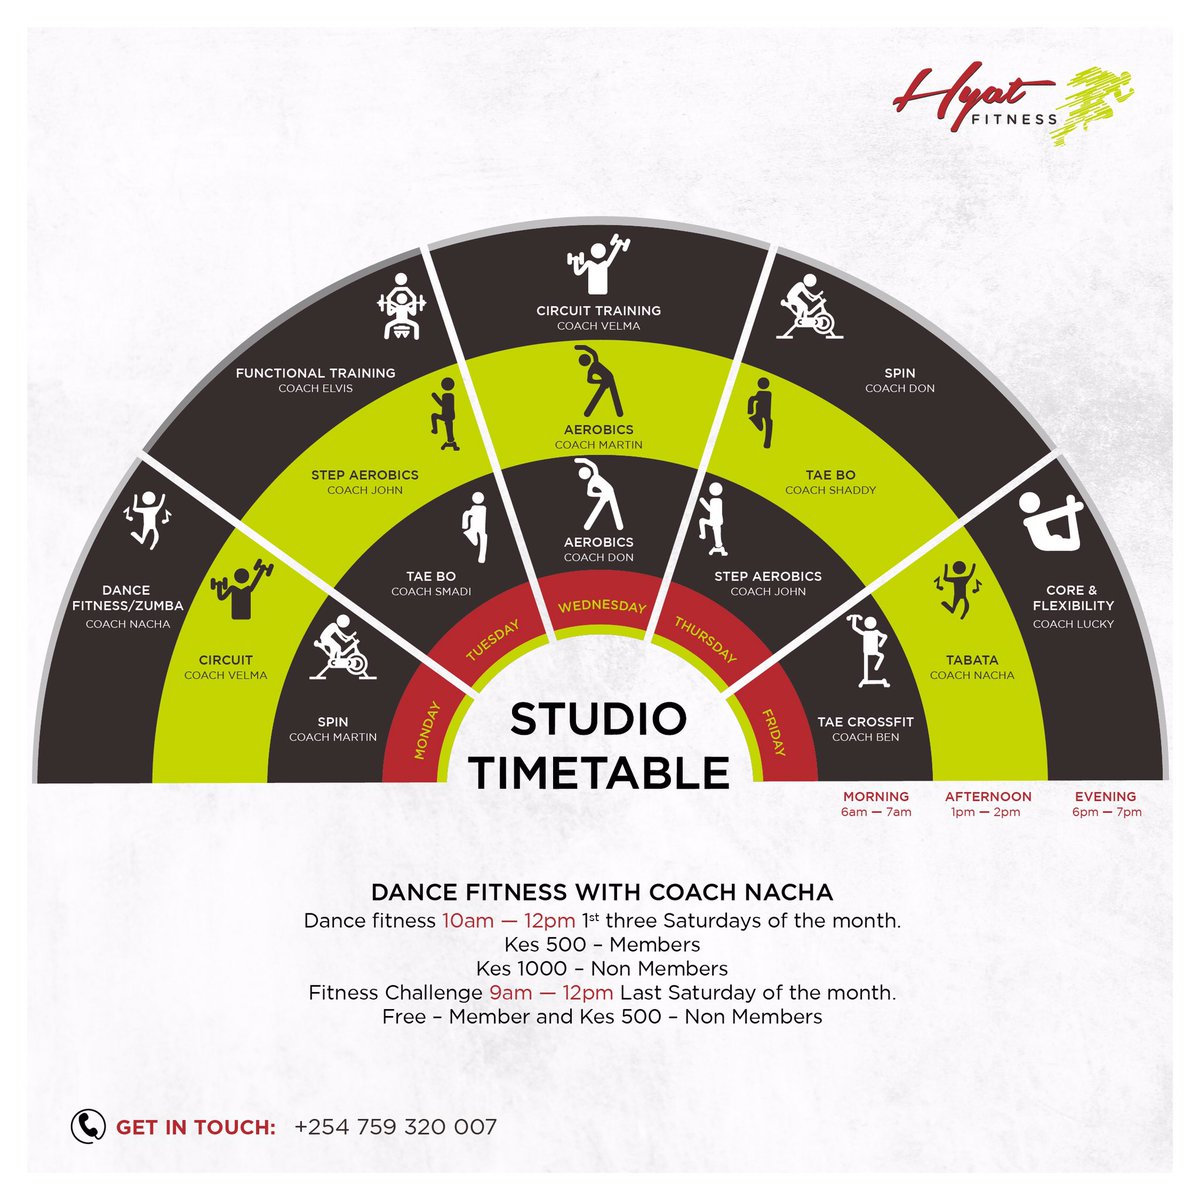 Don't forget that we have lunch time group classes for those who are not early birds or evening people.

#hyatfitness #hyatfitnesscentre #hyatfitnesschallenge #hyatfitnesskenya #studio #studioaerobic #aerobicsclass #aerobicgymnastics #taebo #spinning #circuittraining #yoga